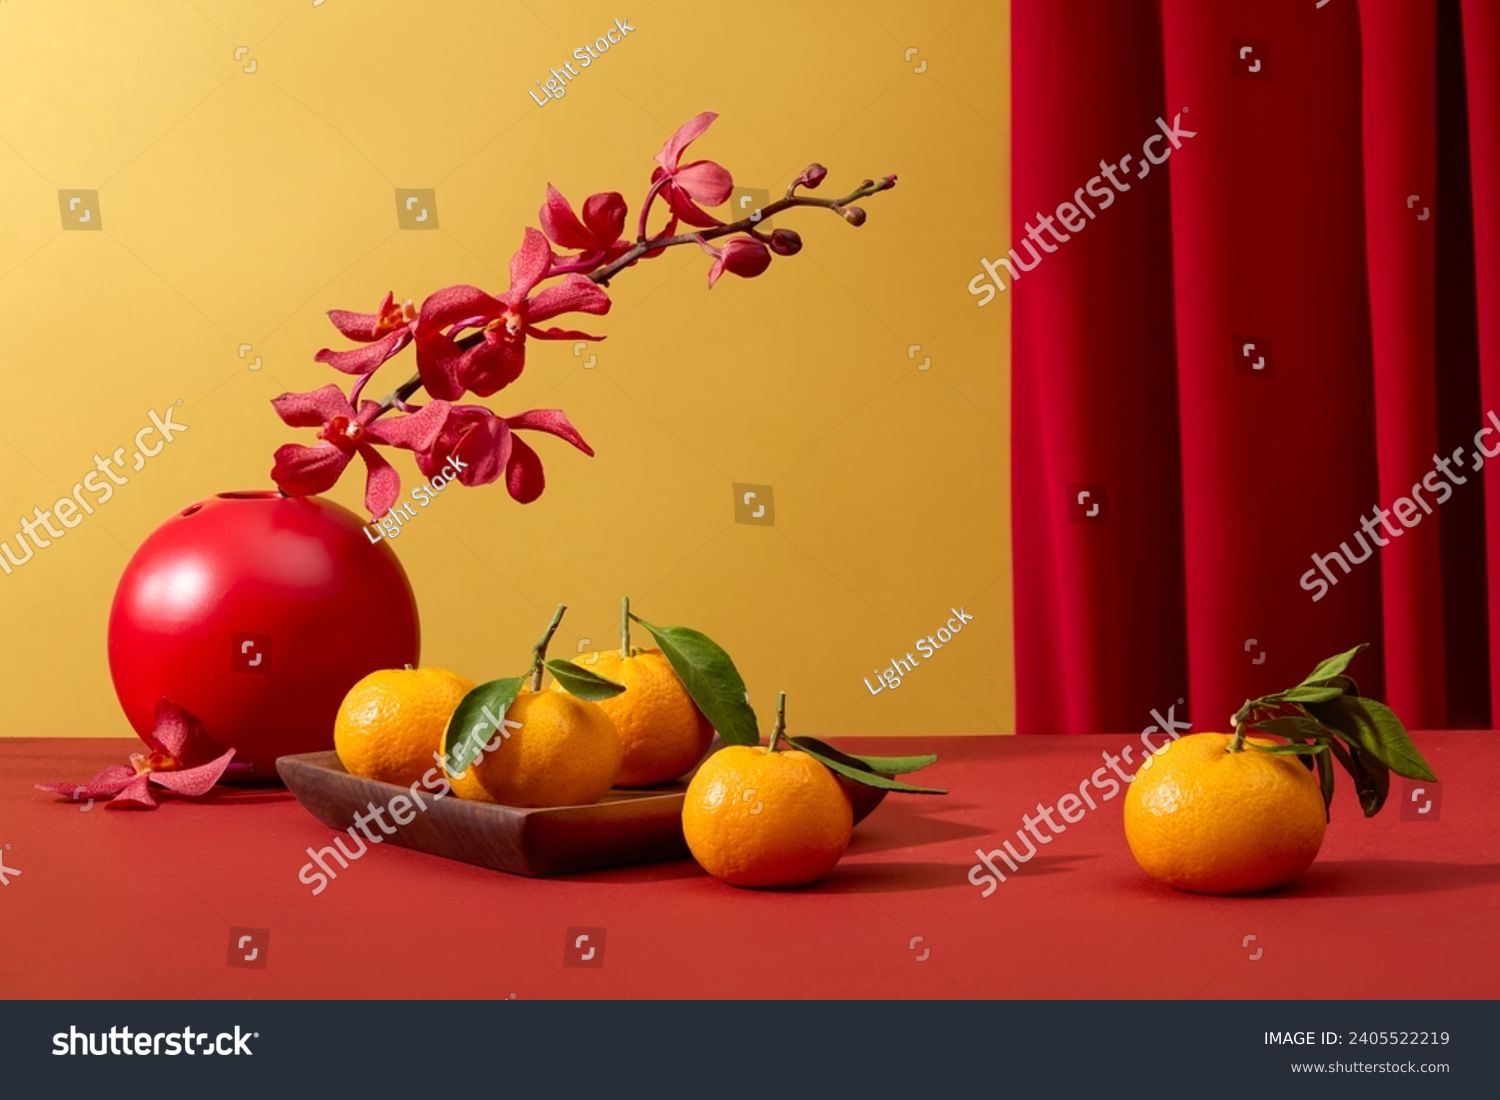 Tangerines displayed on wooden dish and a flower pot decorated on red surface. During Chinese New Year, red is said to symbolize luck and happiness #2405522219